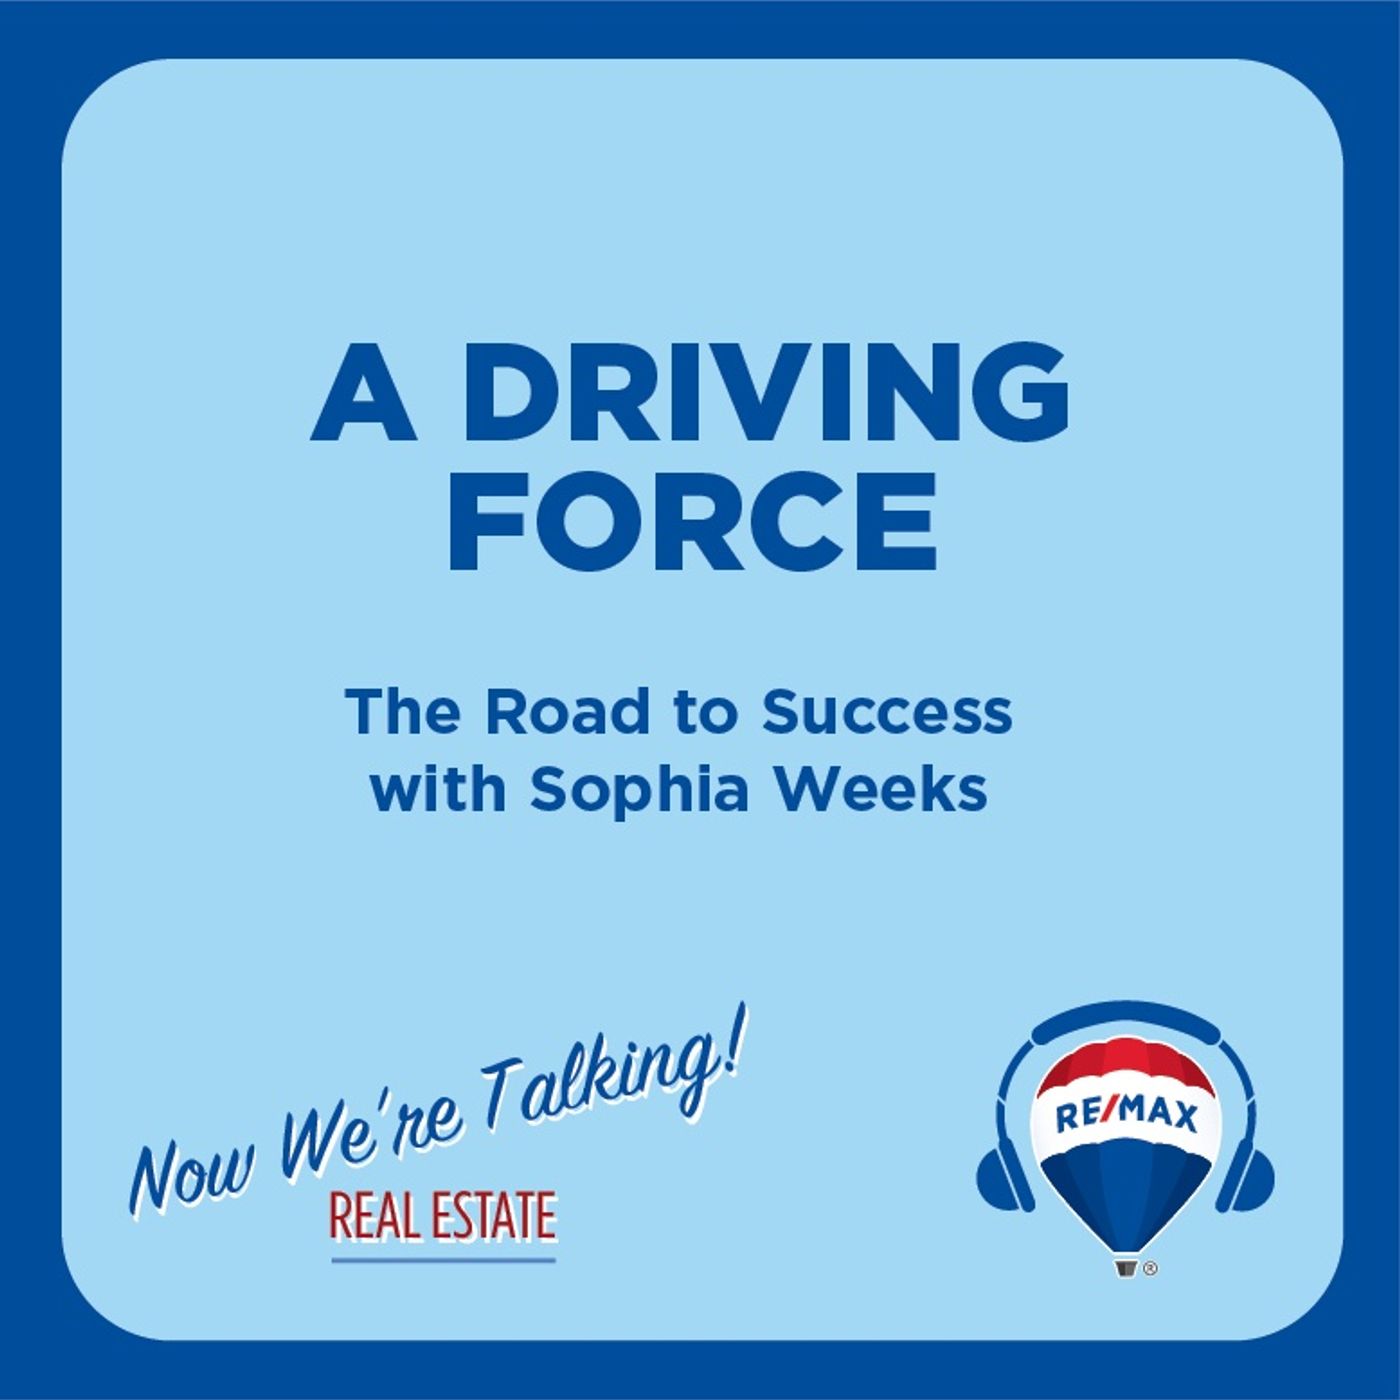 A Driving Force: The Road to Success with Sophia Weeks